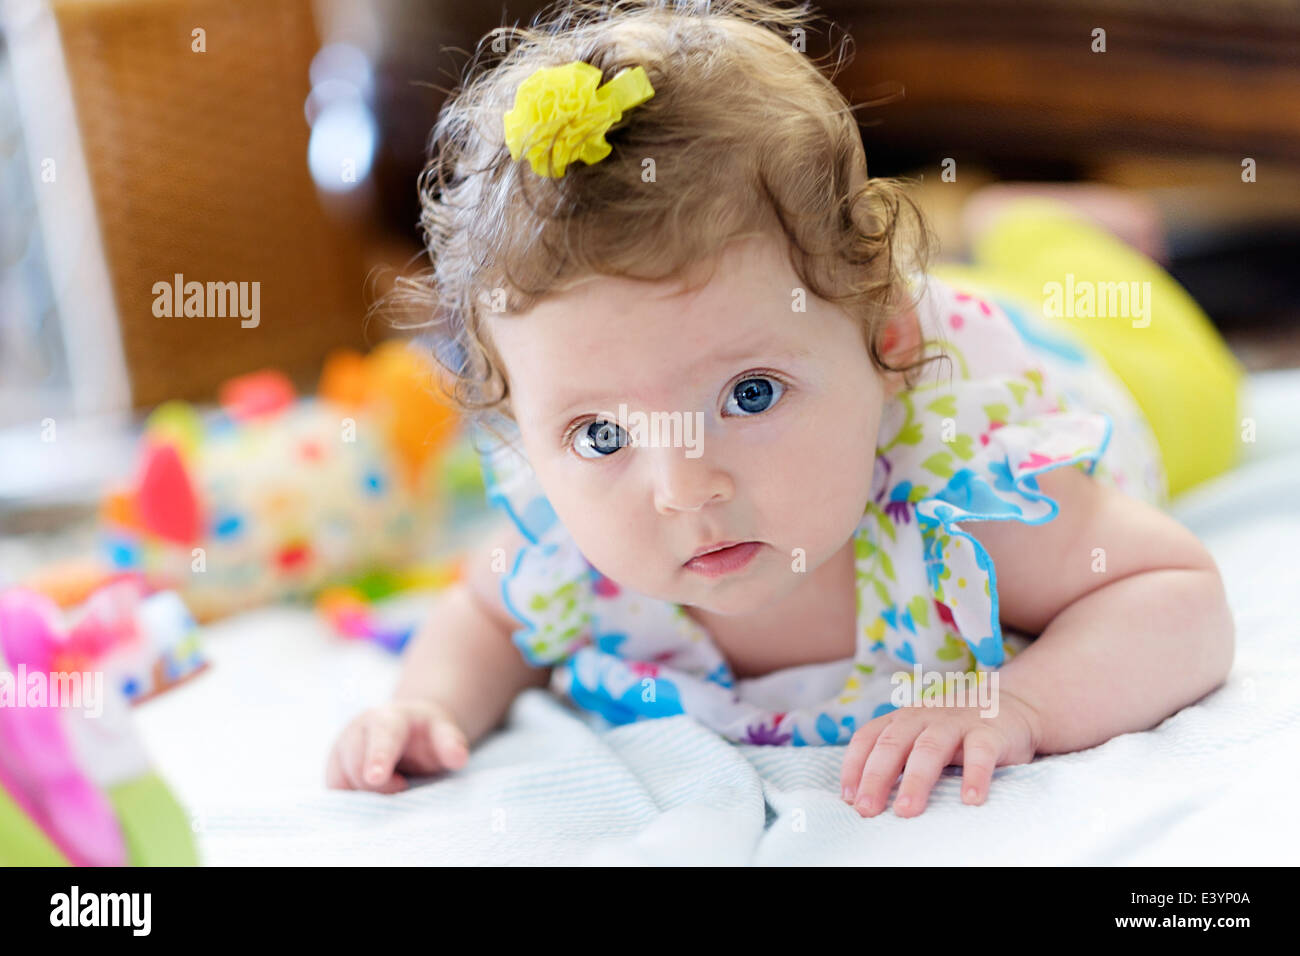 A three month old Caucasian infant lying on her stomach surrounded by toys. Stock Photo